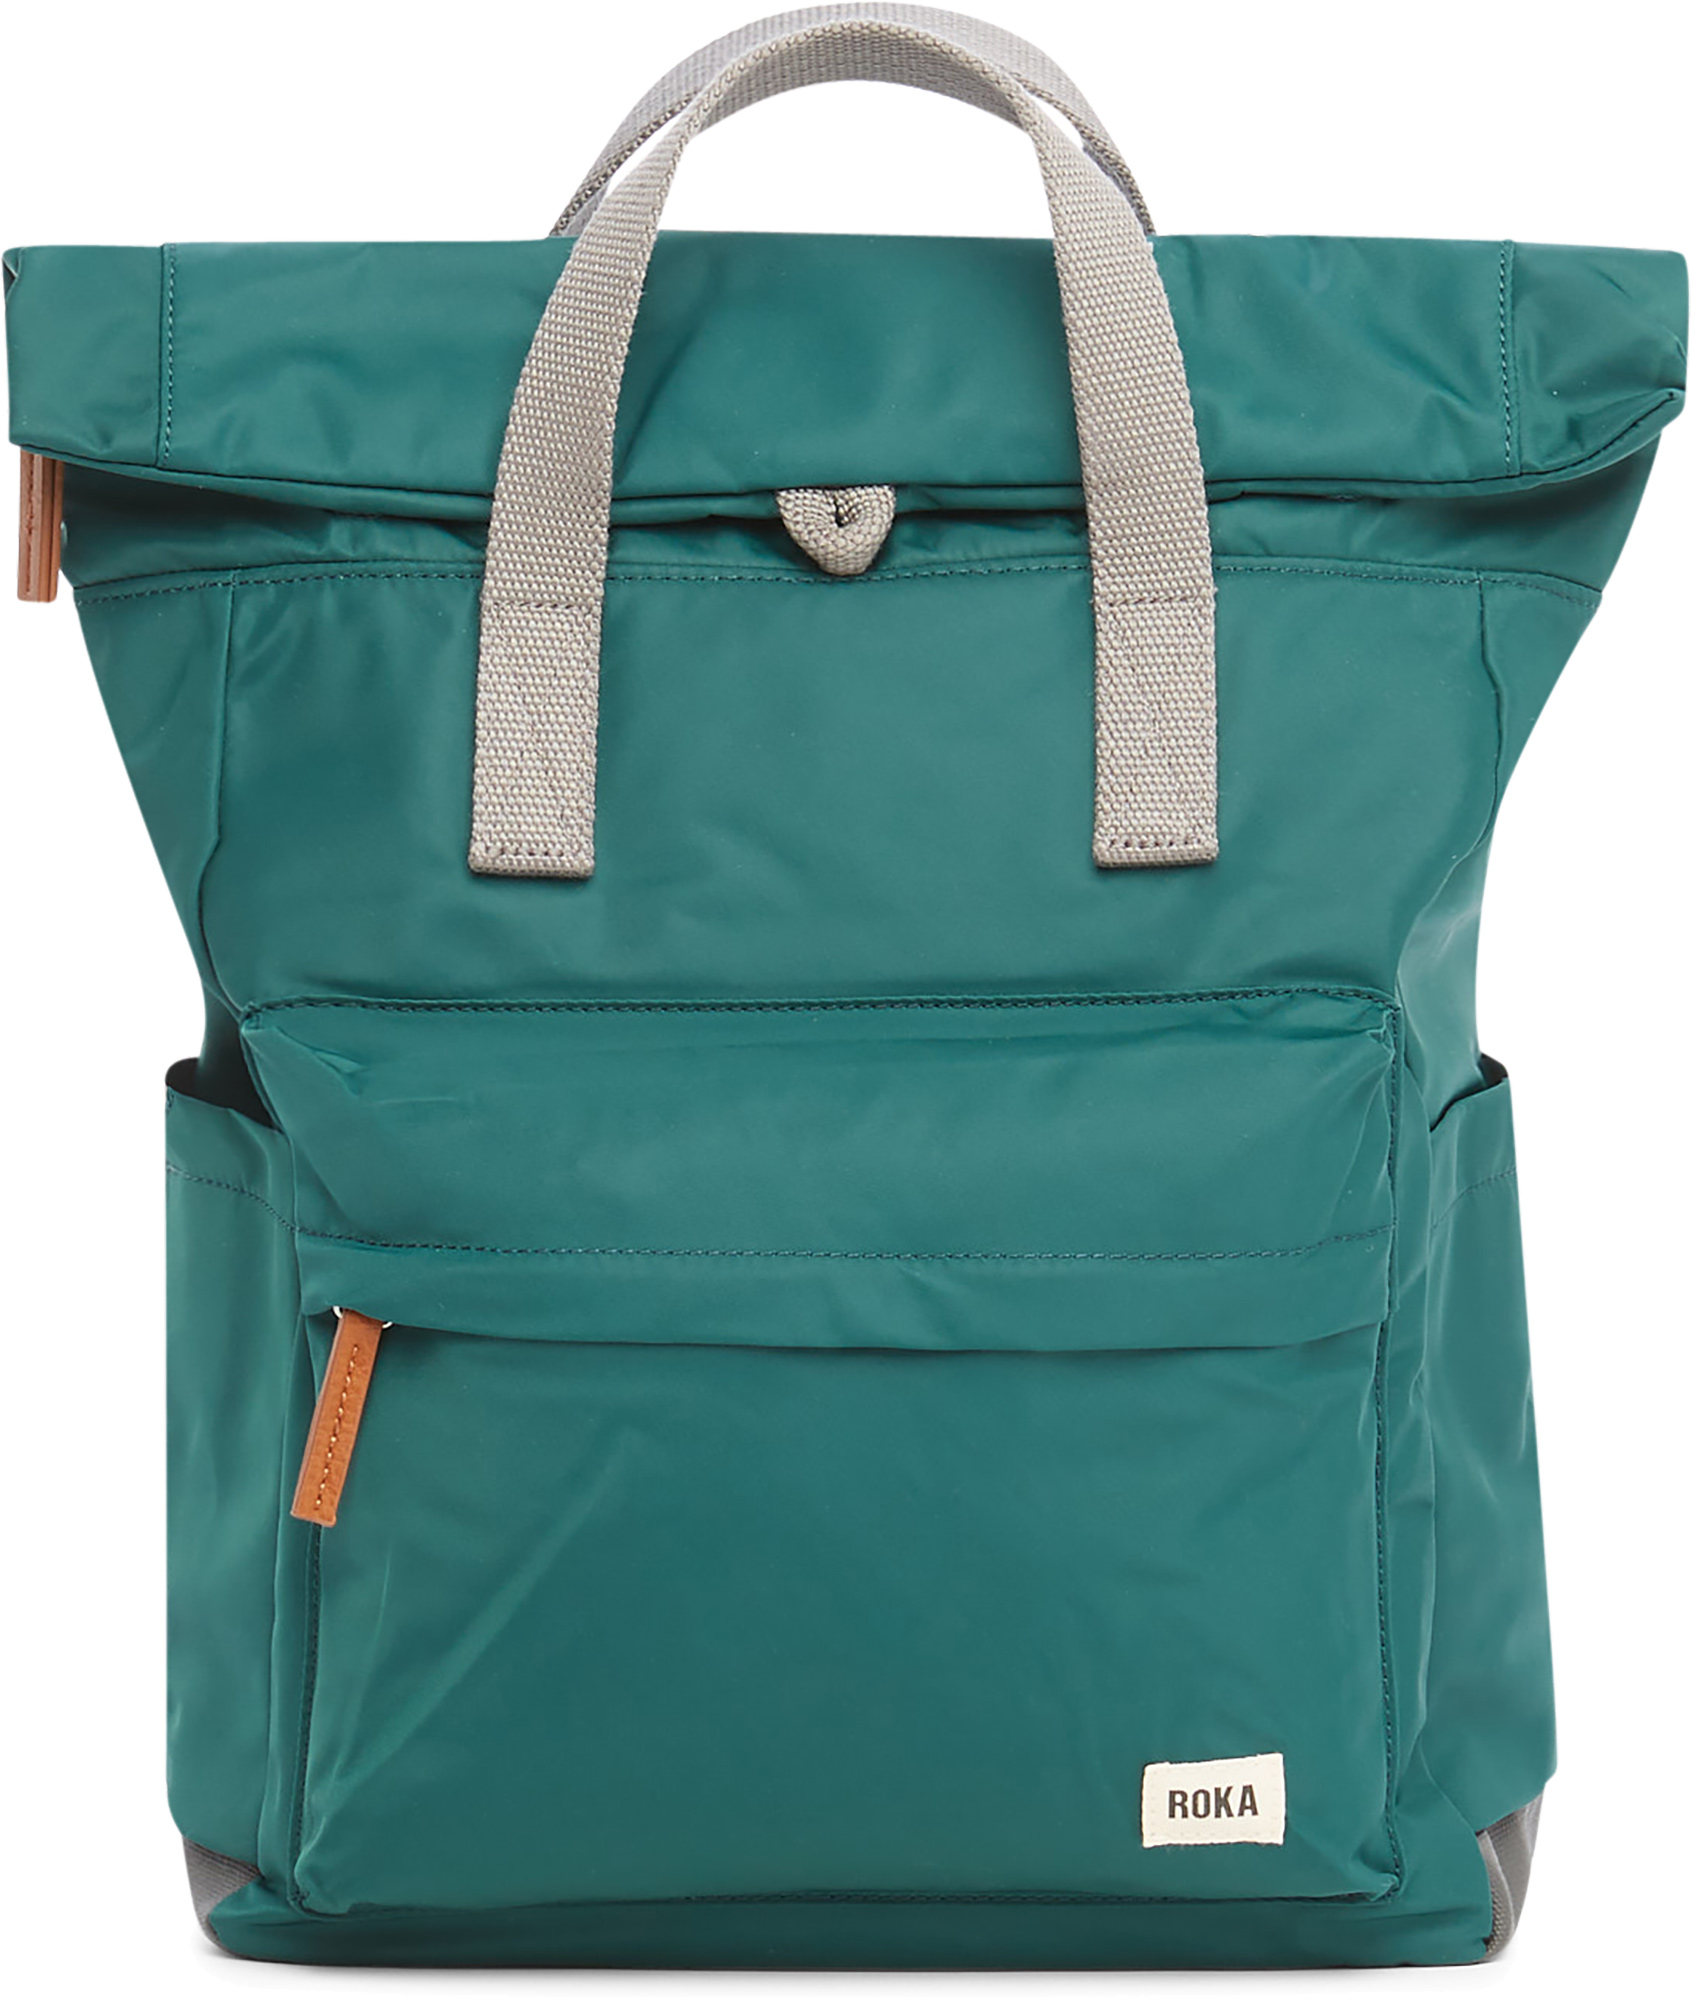 Roka Teal Canfield B Sustainable Nylon Med size 15L